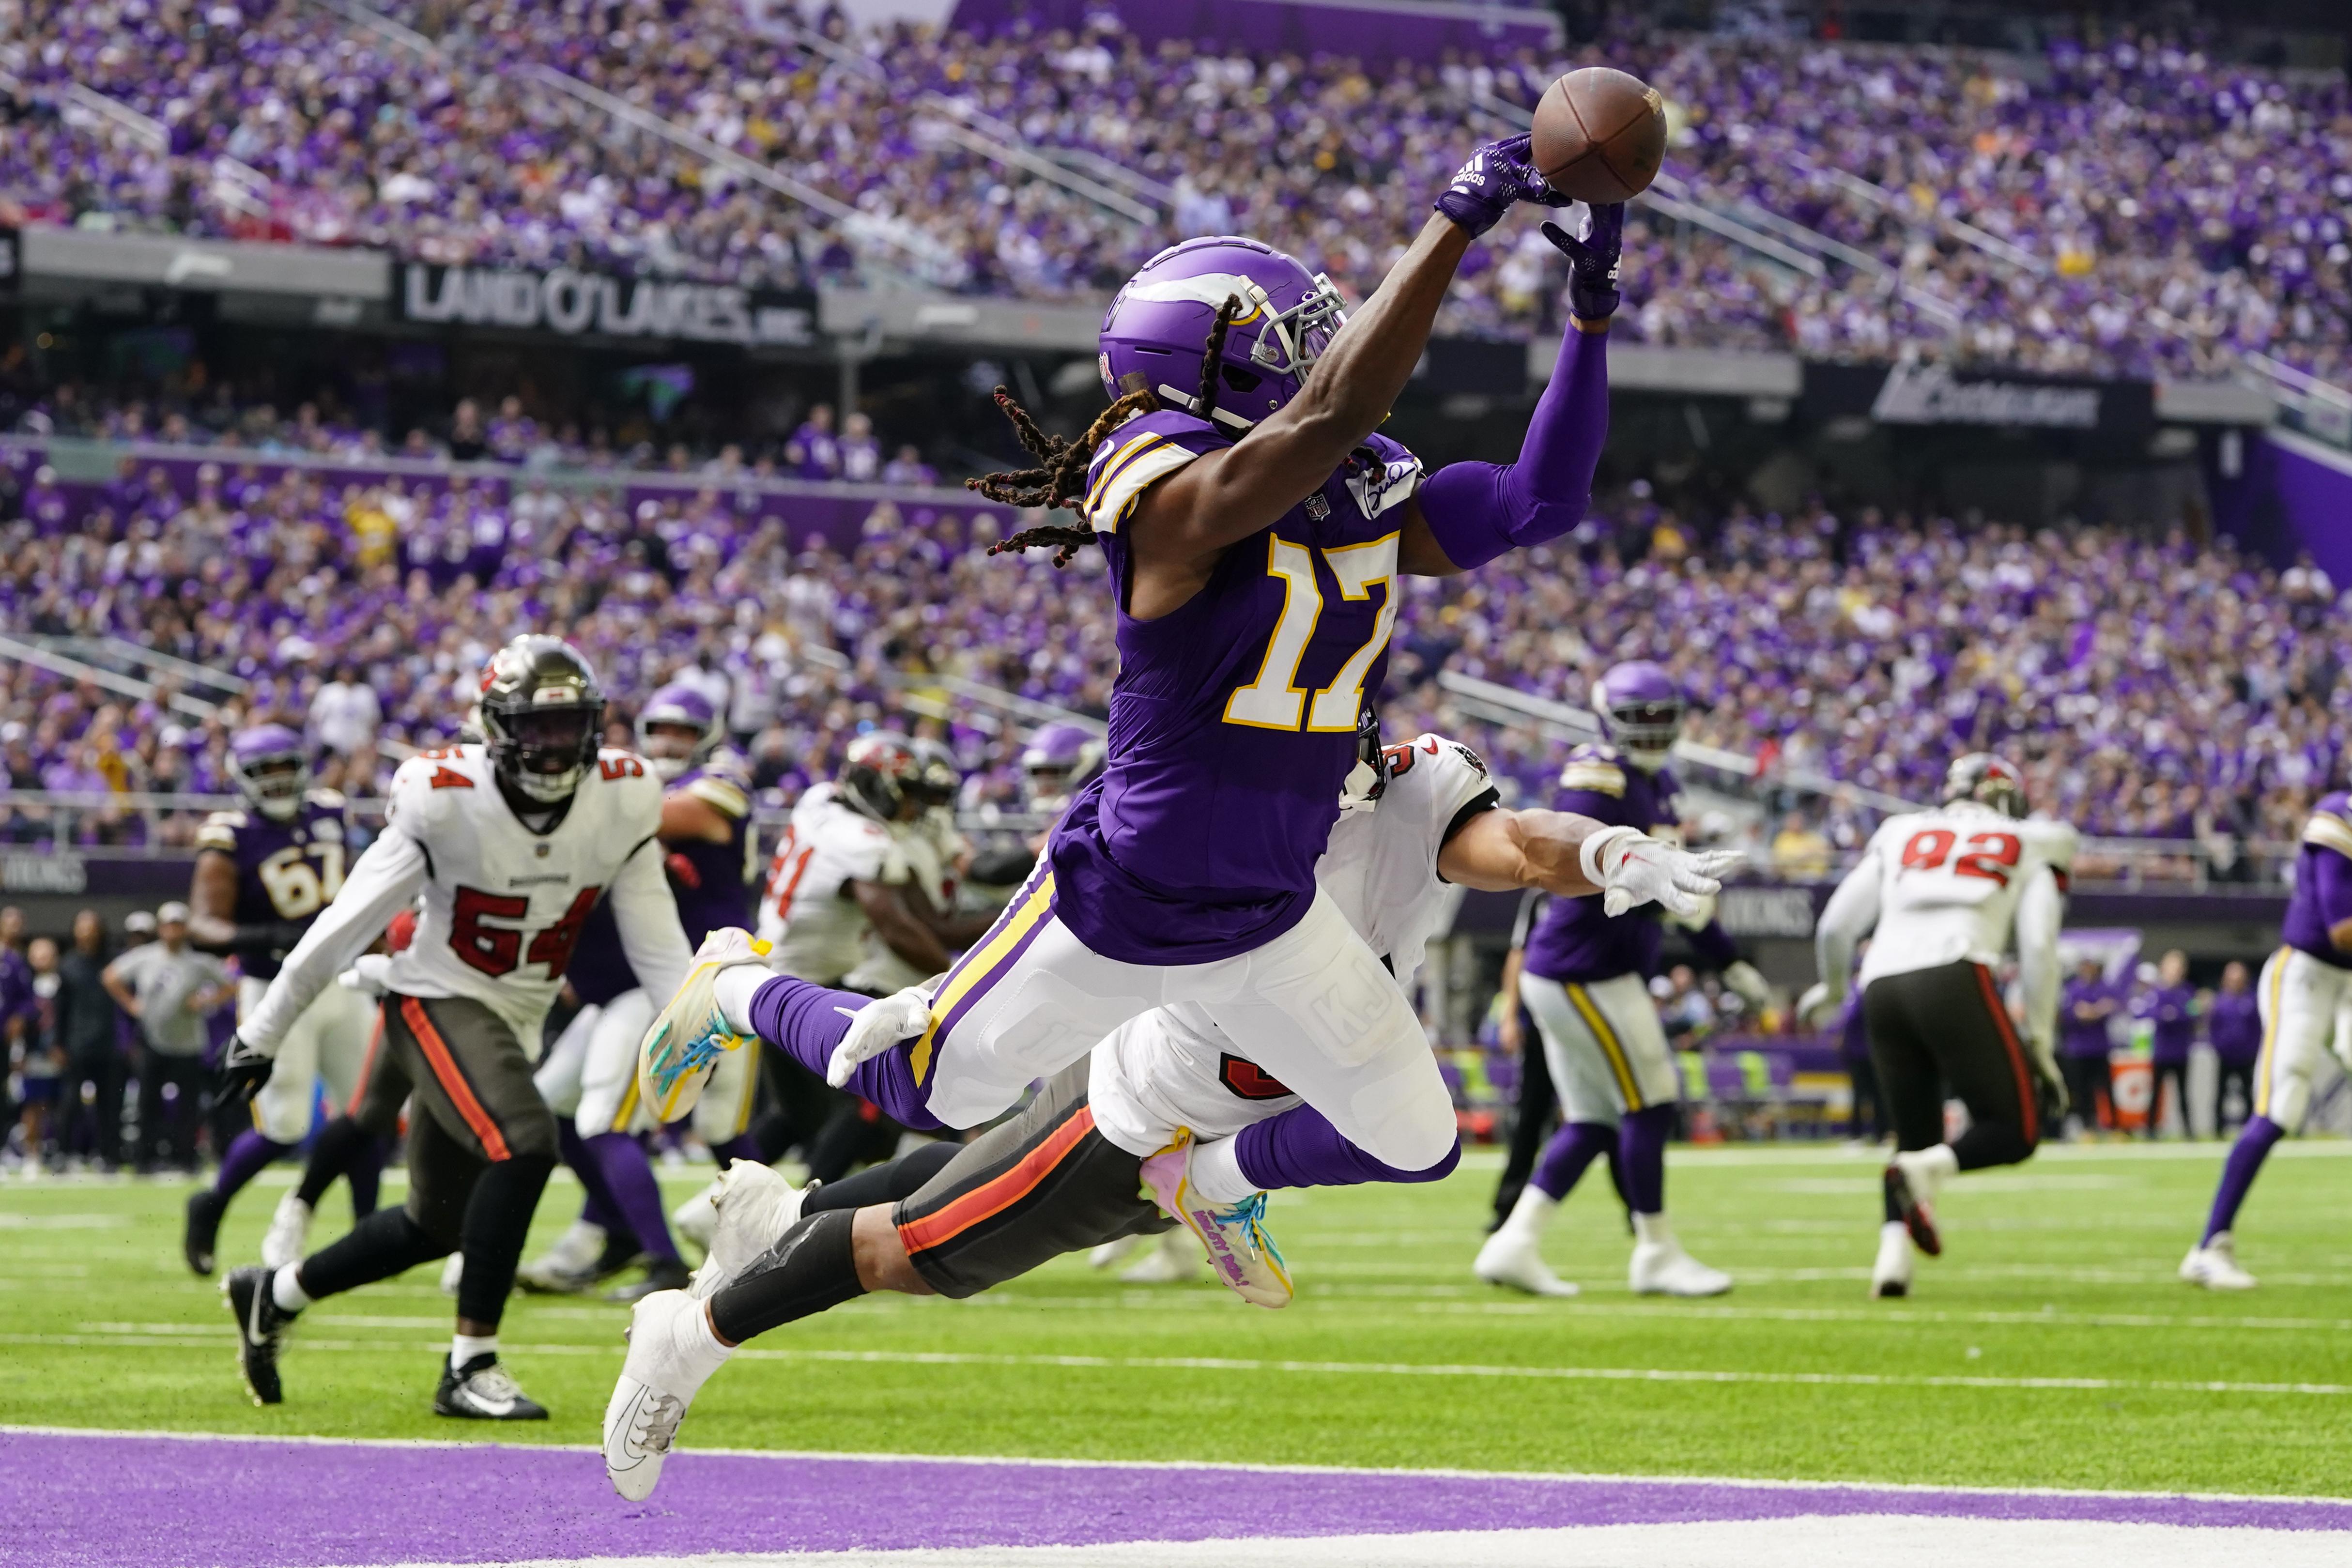 Minnesota Vikings must quickly regroup after the unpleasant